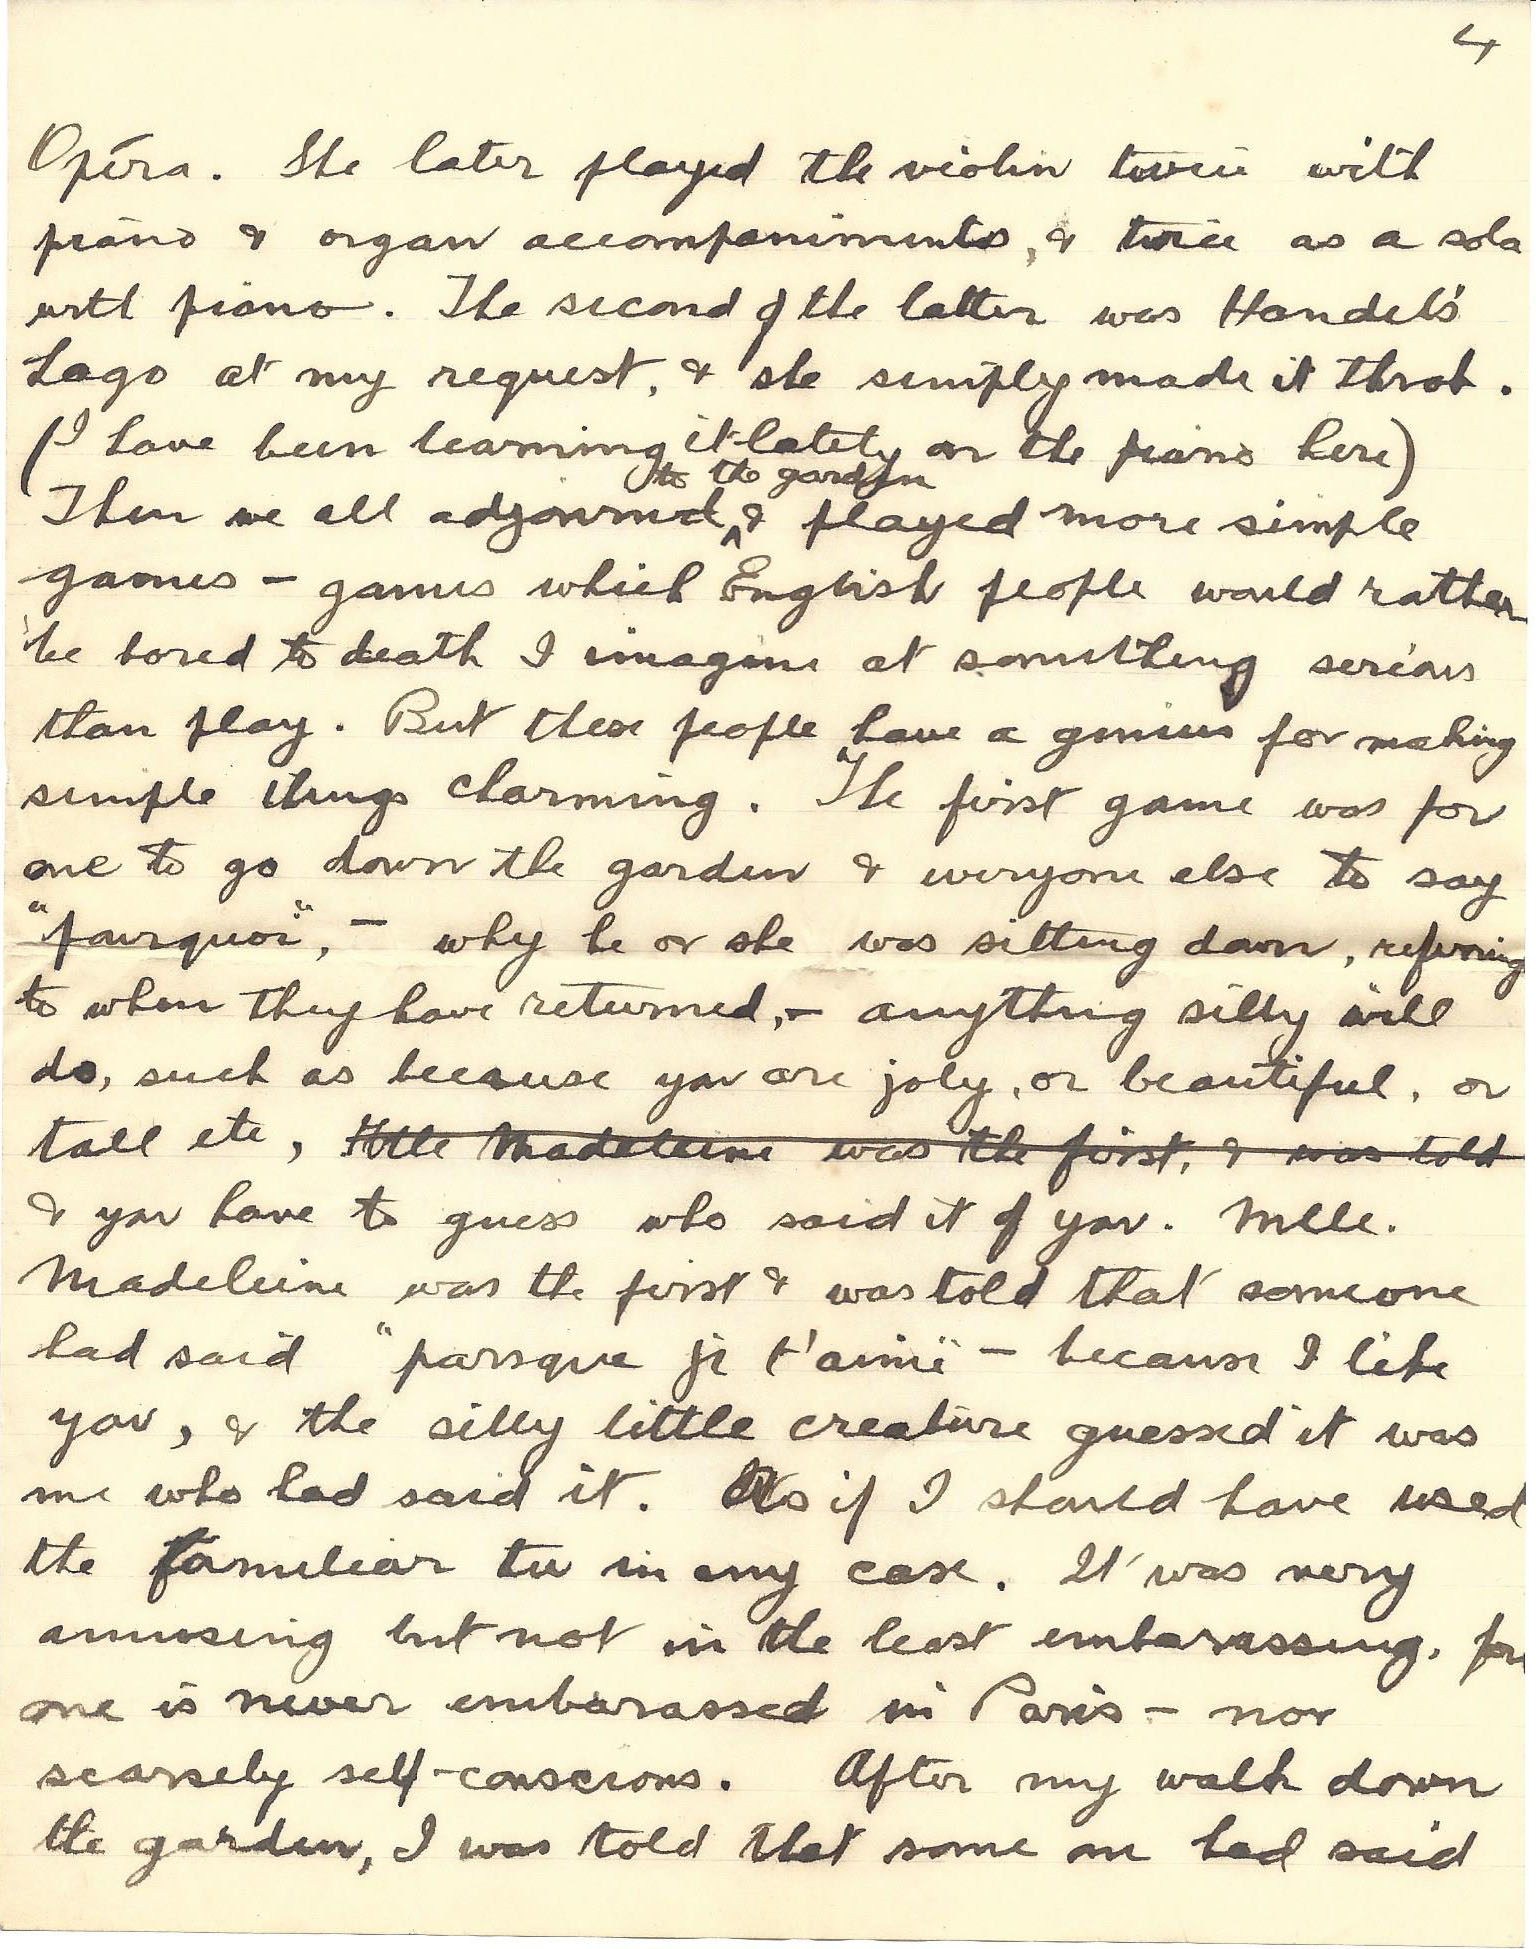 1919-07-20 p4 Donald Bearman letter to his father